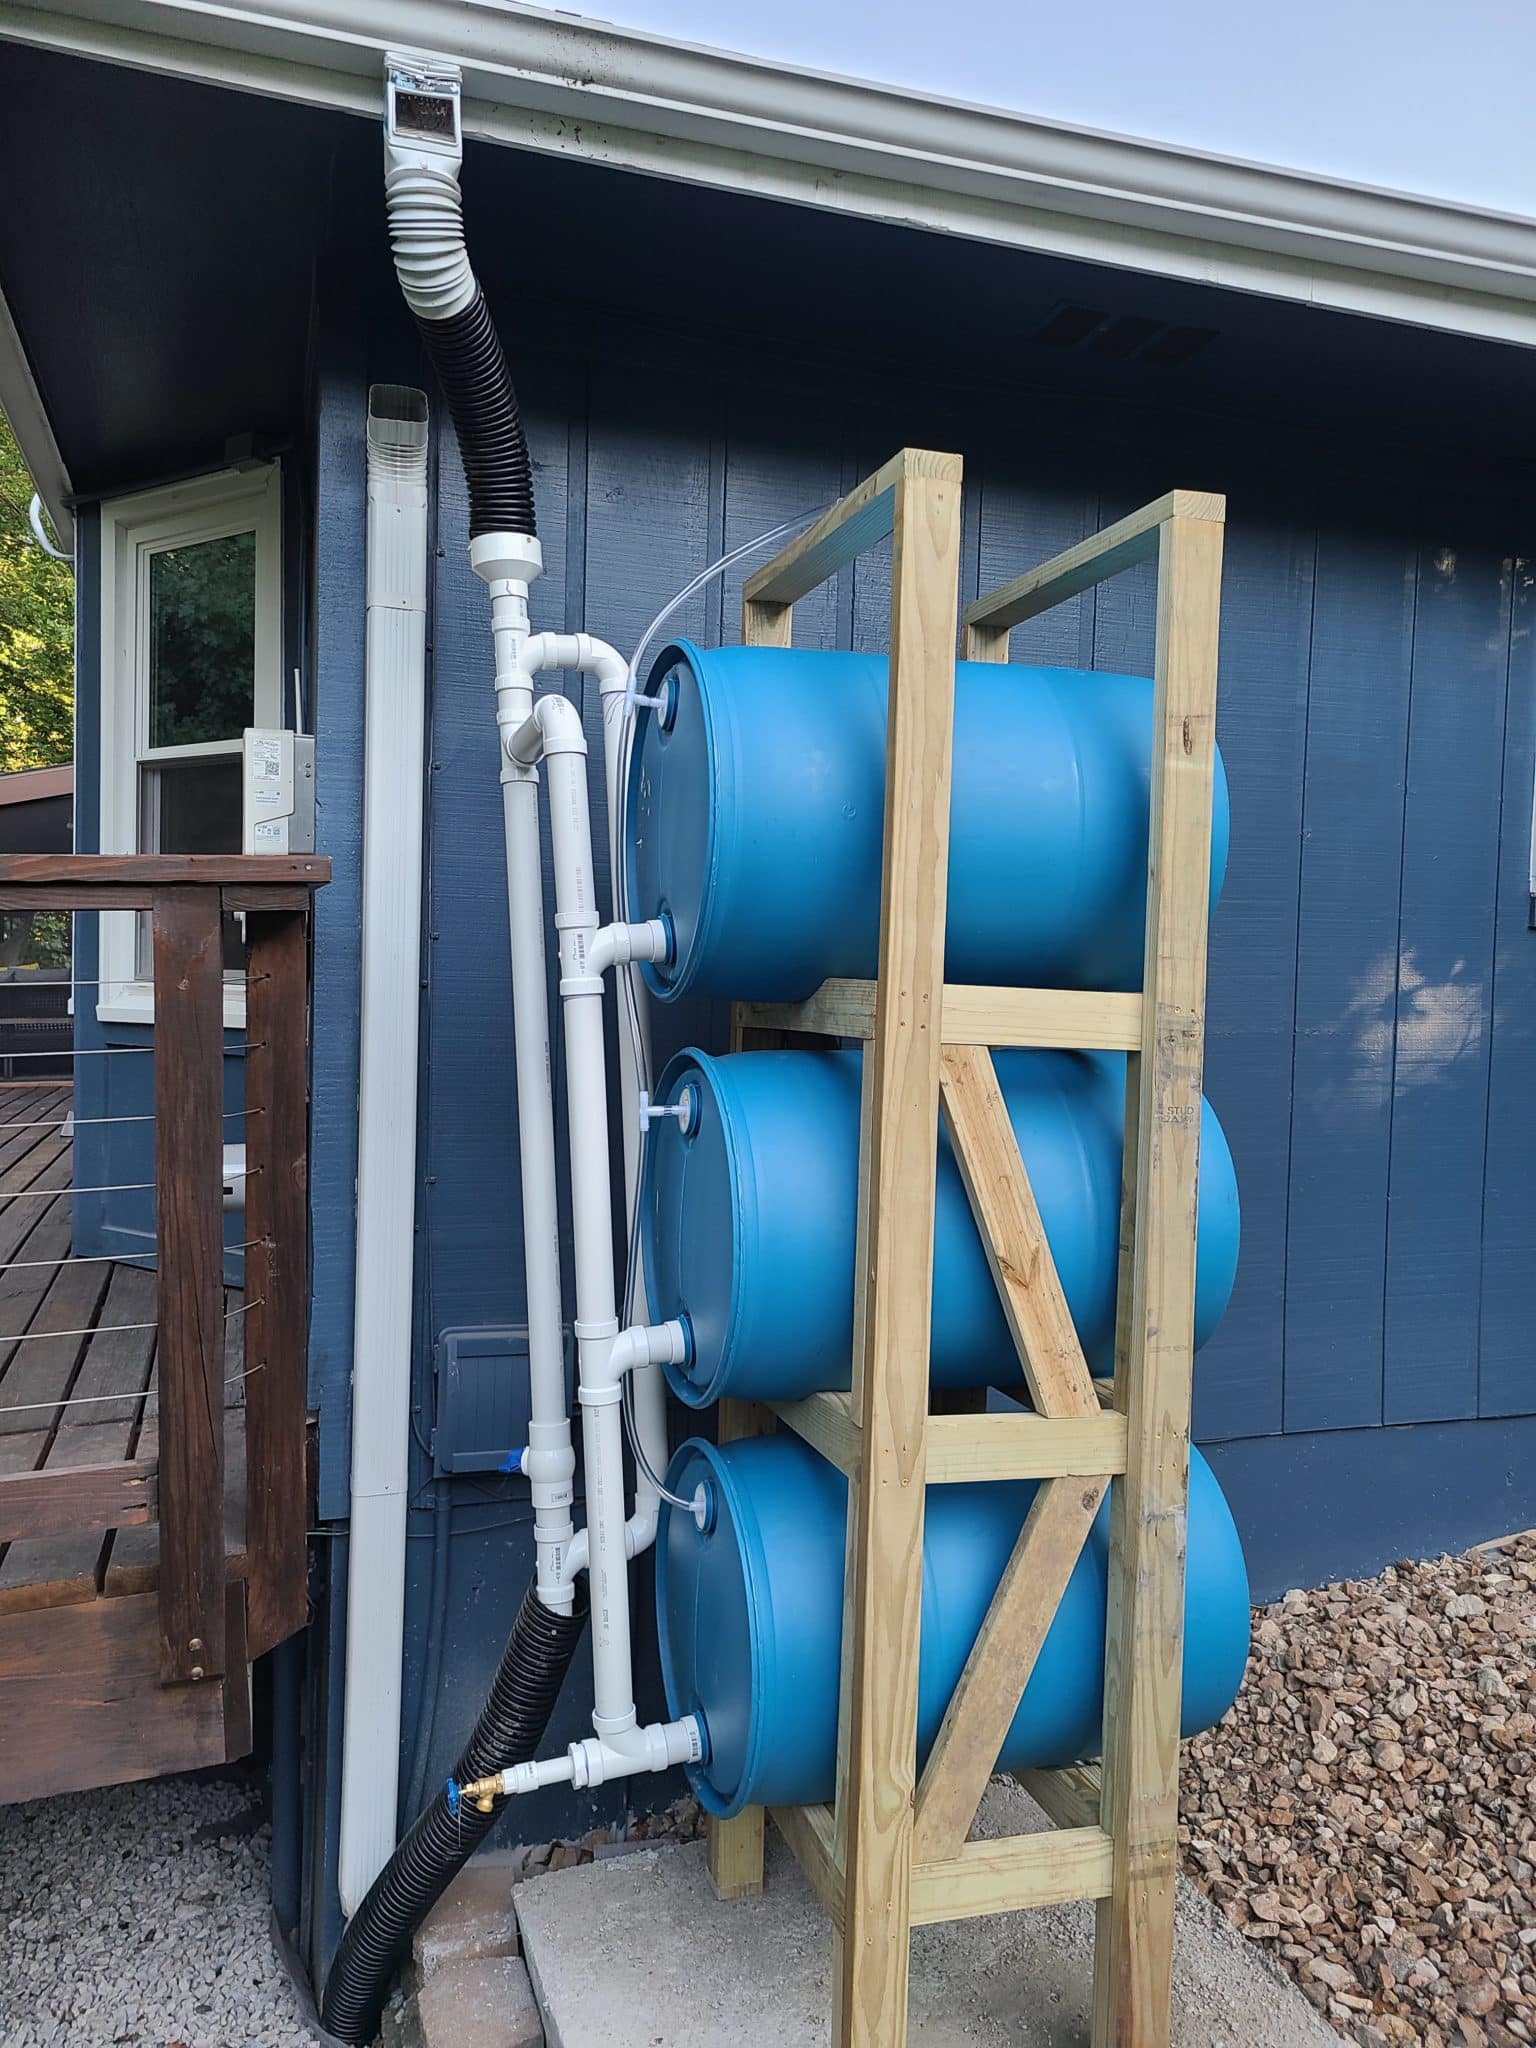 DIY stacked rain barrel system without decorative screen surrounding it